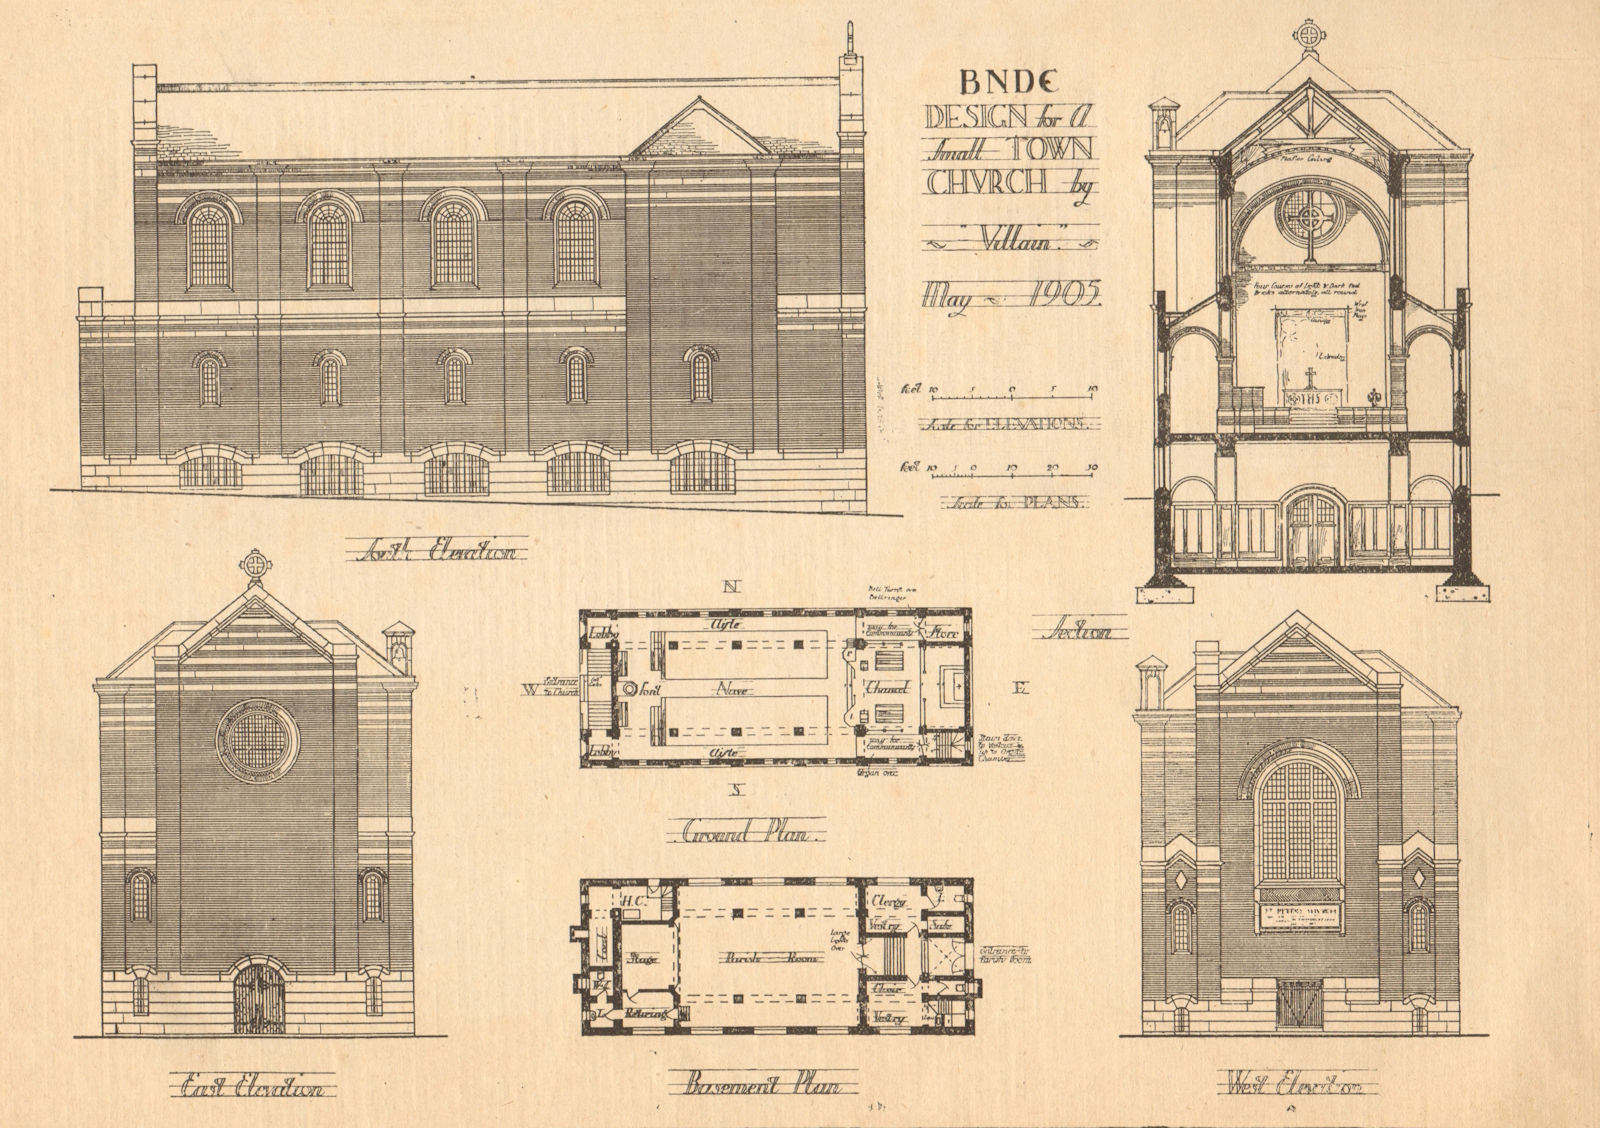 Design for a small town church by Villain, May 1905. Plans & elevations 1905